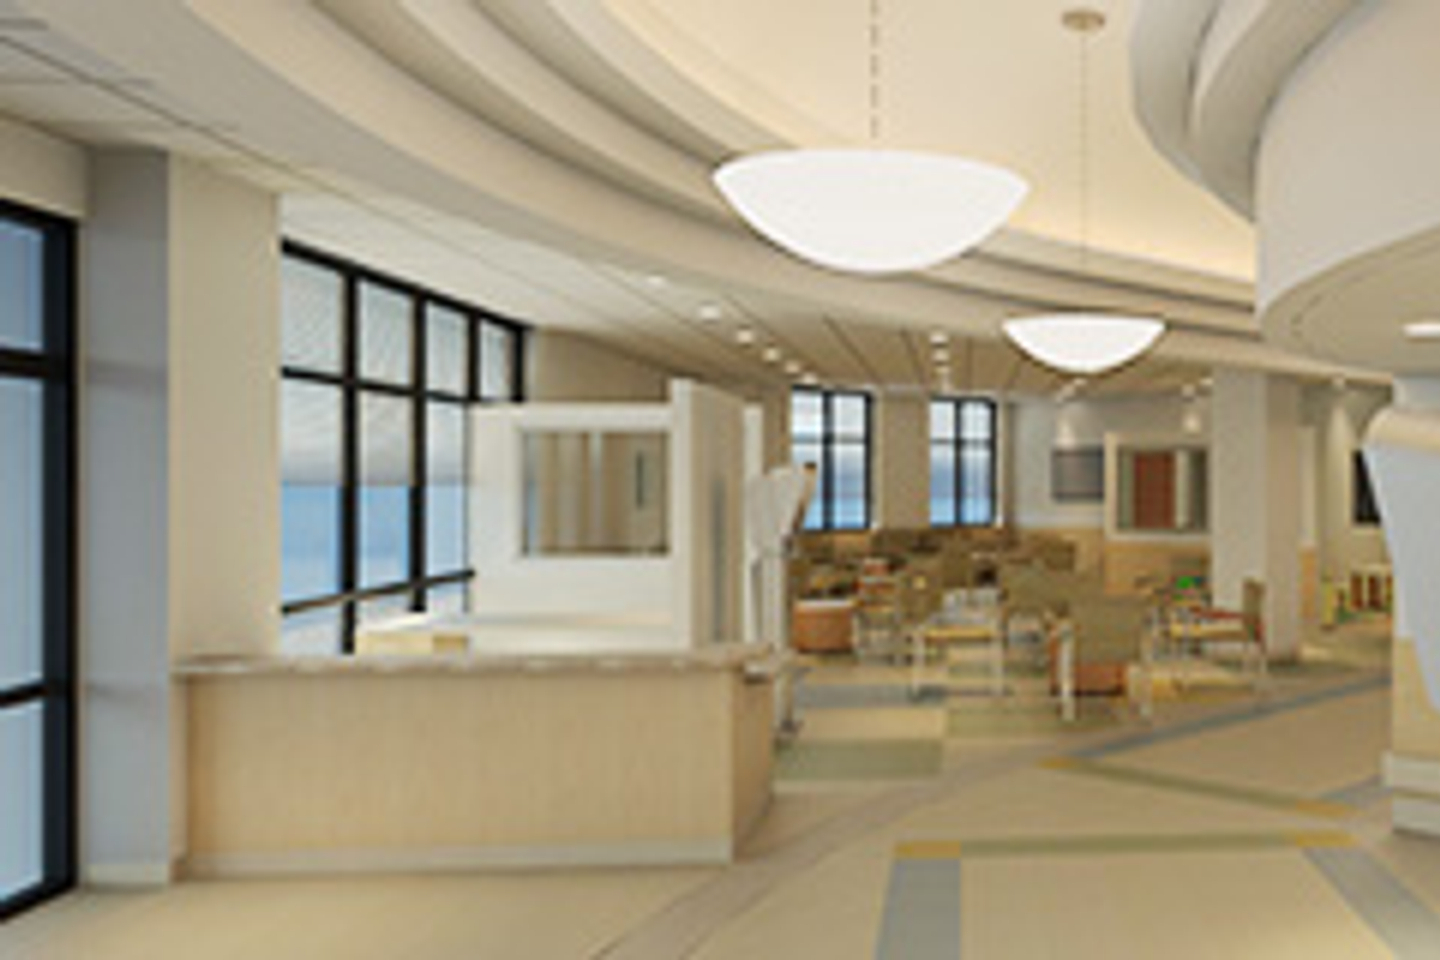 Interior of the Reston Hospital Center Emergency Room waiting area, with chairs and tables for patients to use during their visit.